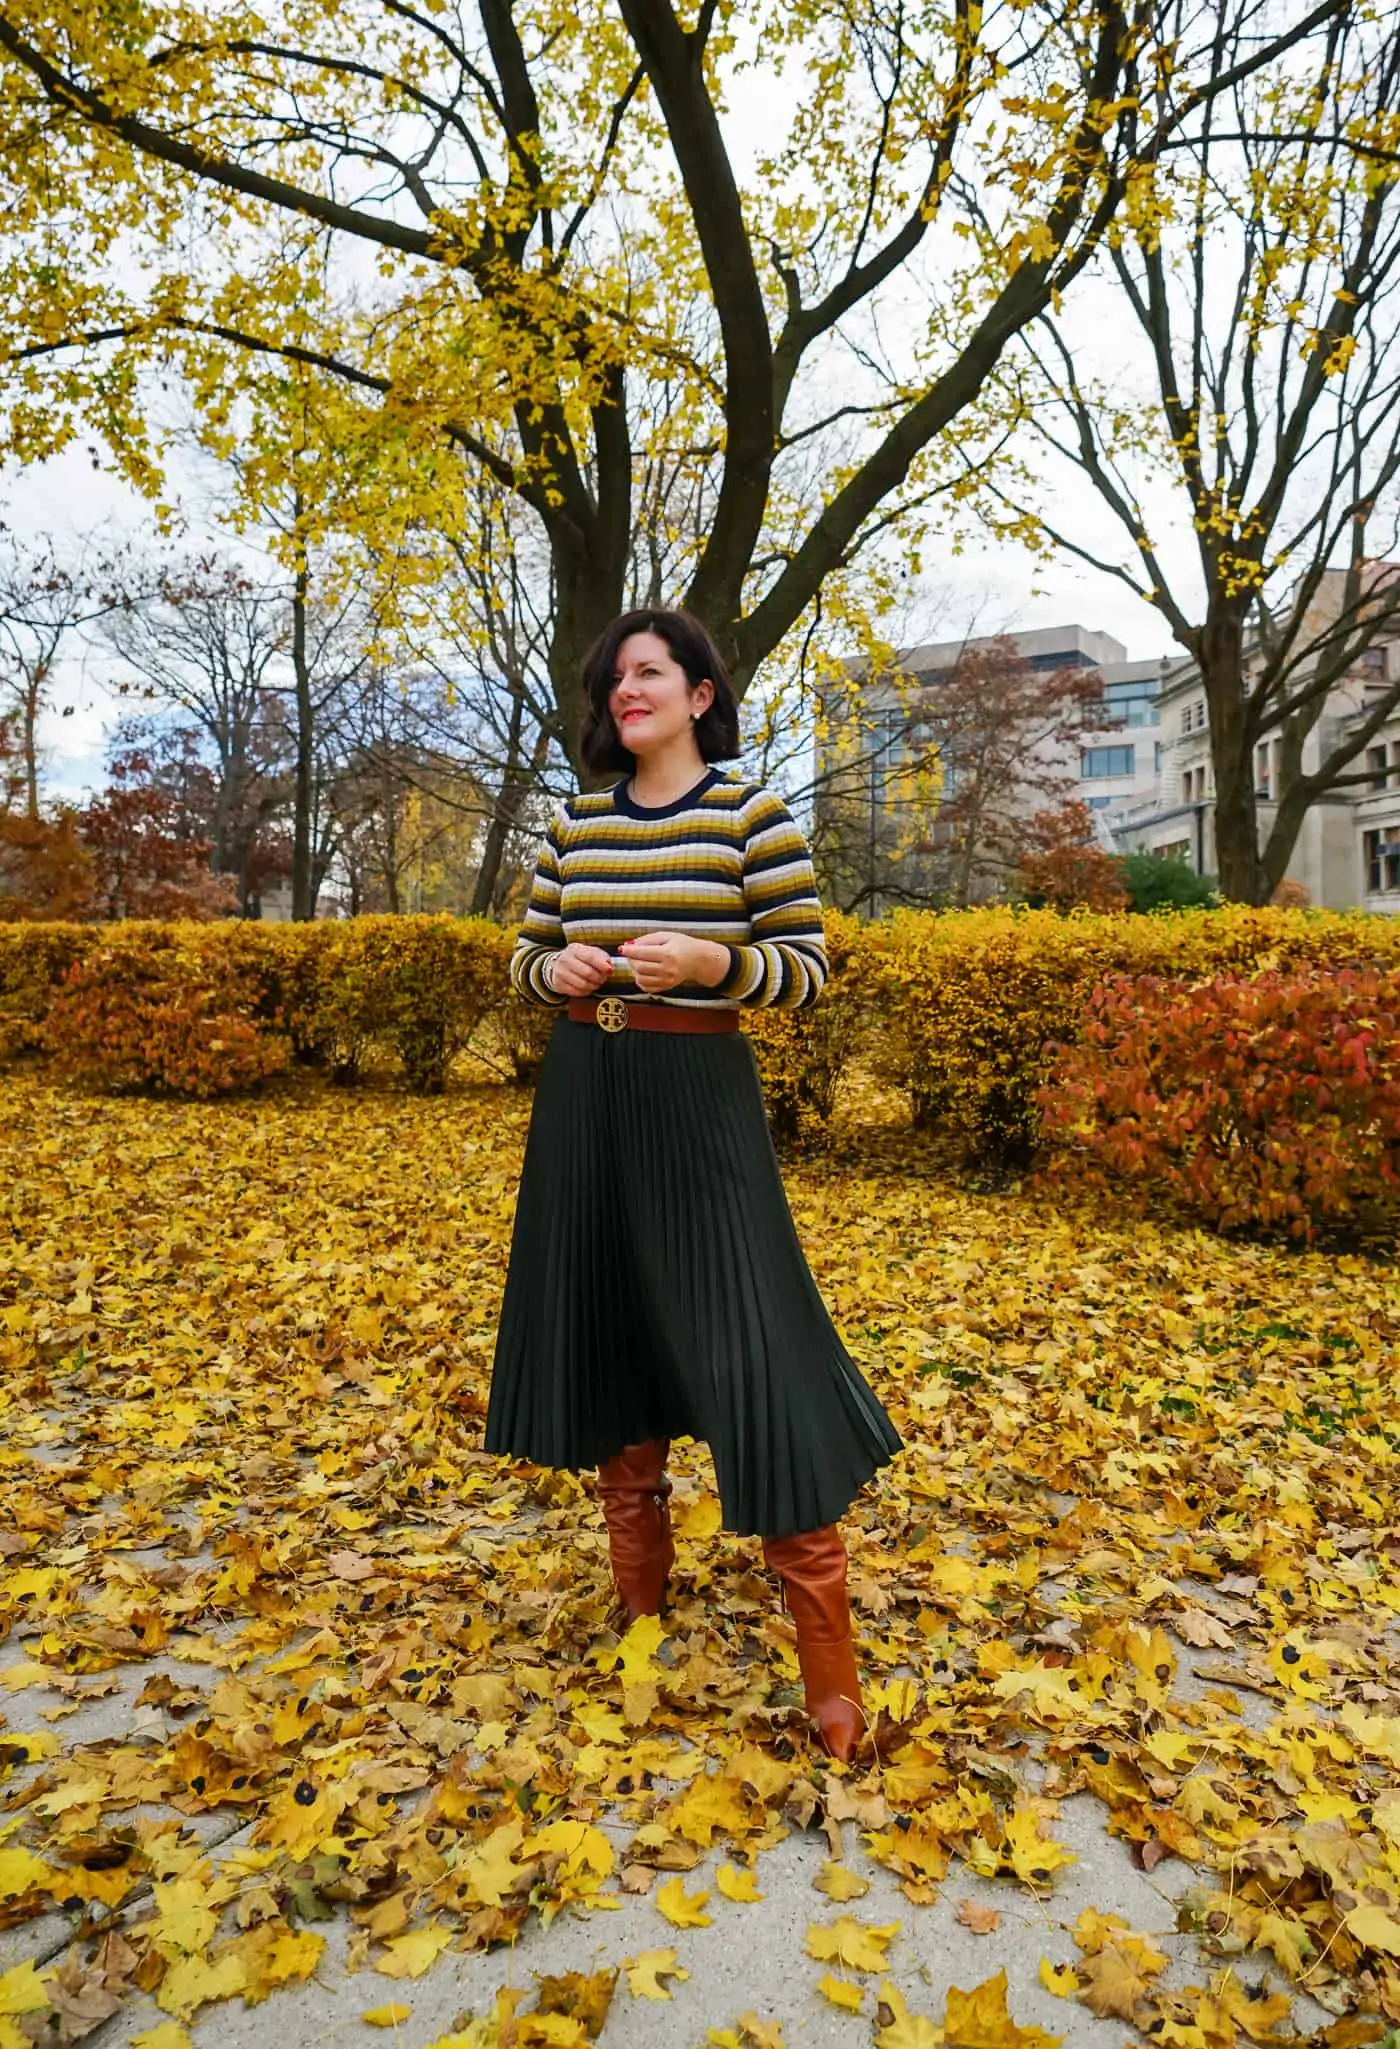 A women wearing a green pleated skirt, striped sweater and brown